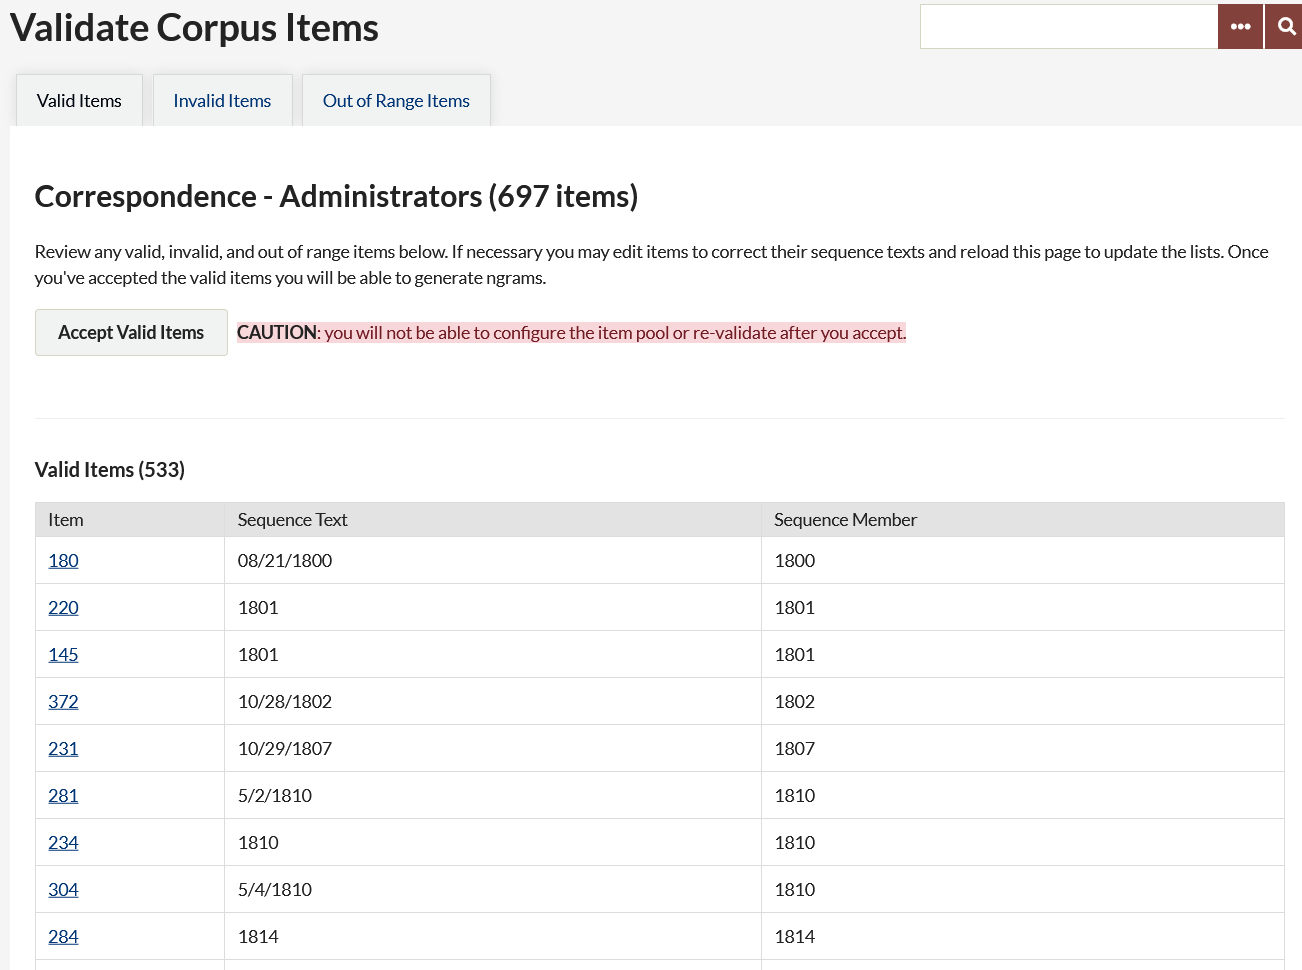 A screenshot of the Validate Corpus Items page with the Valid Items tab selected. Text at the top of the screen instructs users to review and edit the items before clicking to Accept Valid Items. Below is a table of the Valid items with the content described above.